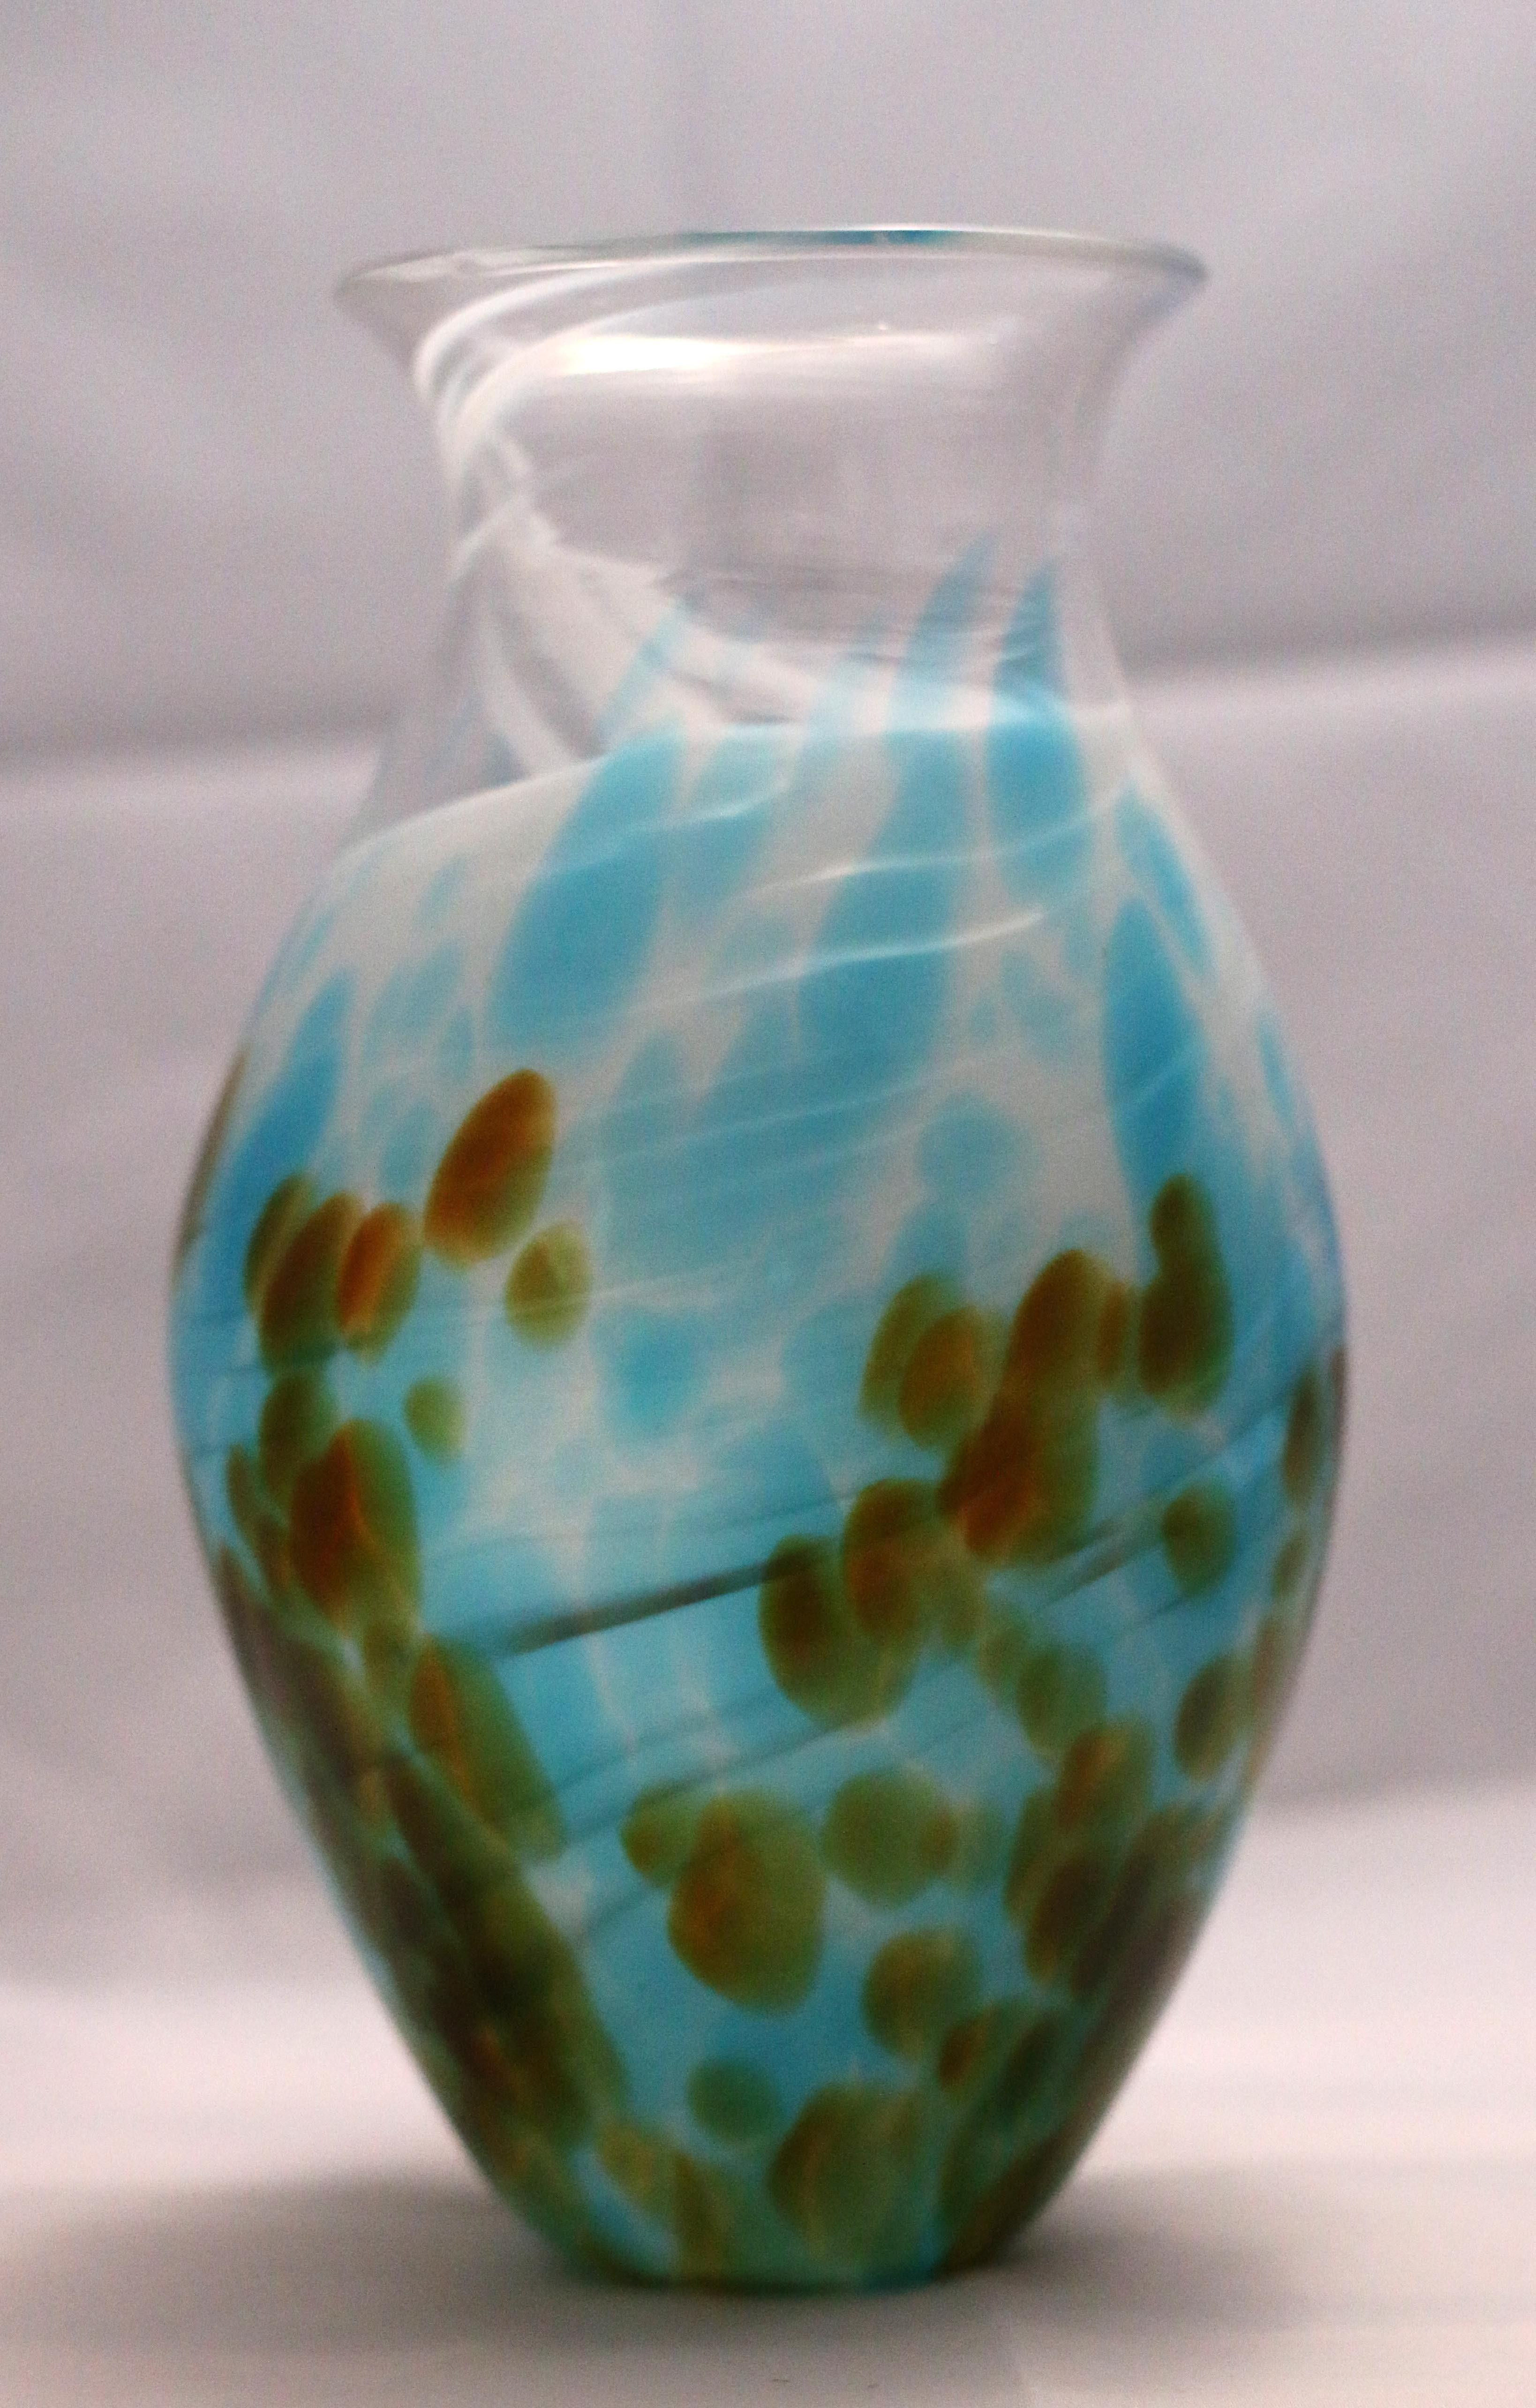 24 Fantastic Art Deco Vases wholesale 2024 free download art deco vases wholesale of 22 hobnail glass vase the weekly world with white milk glass vases bulk glass designs